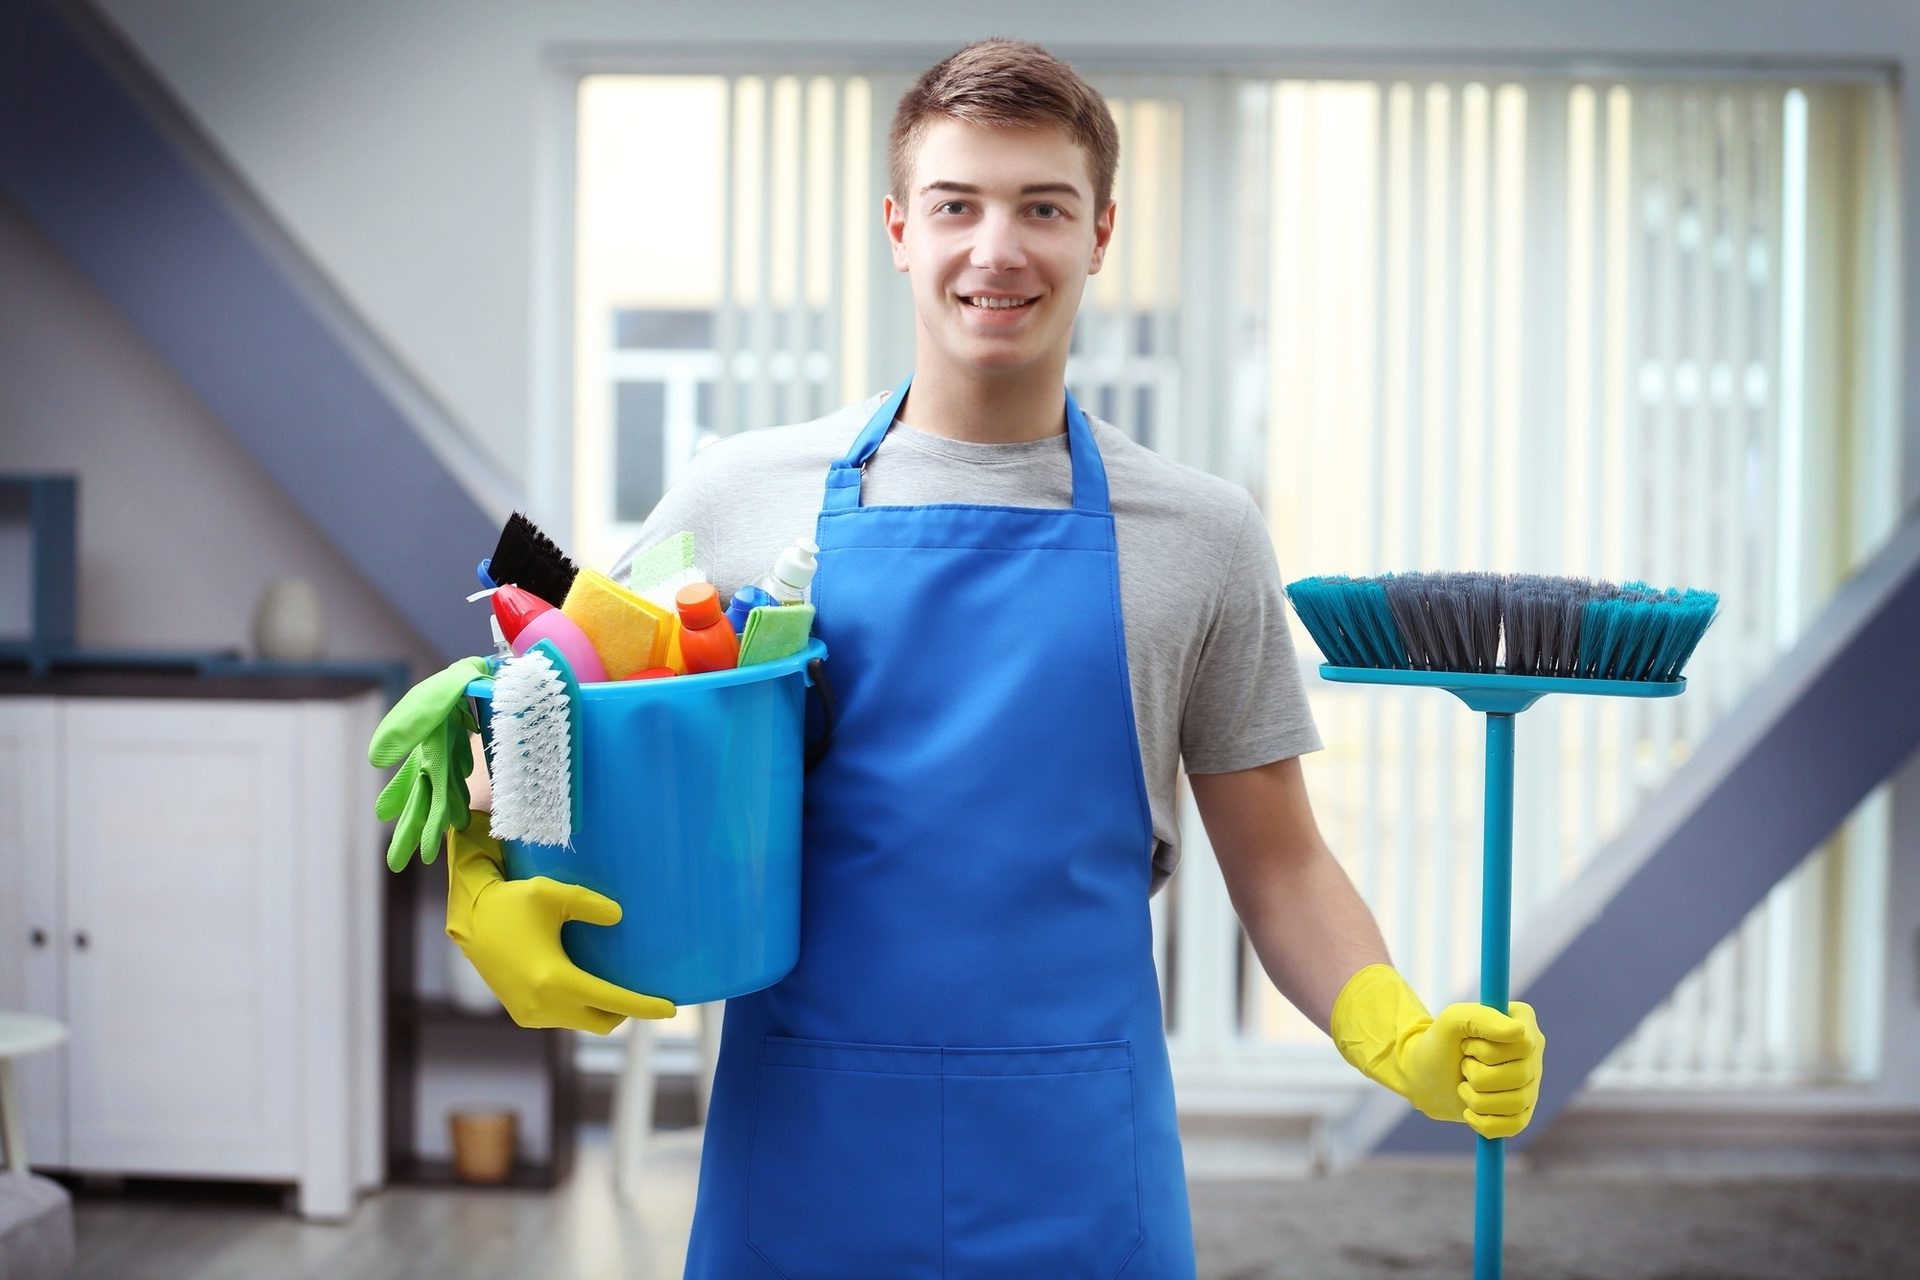 How to choose the right professional cleaning company